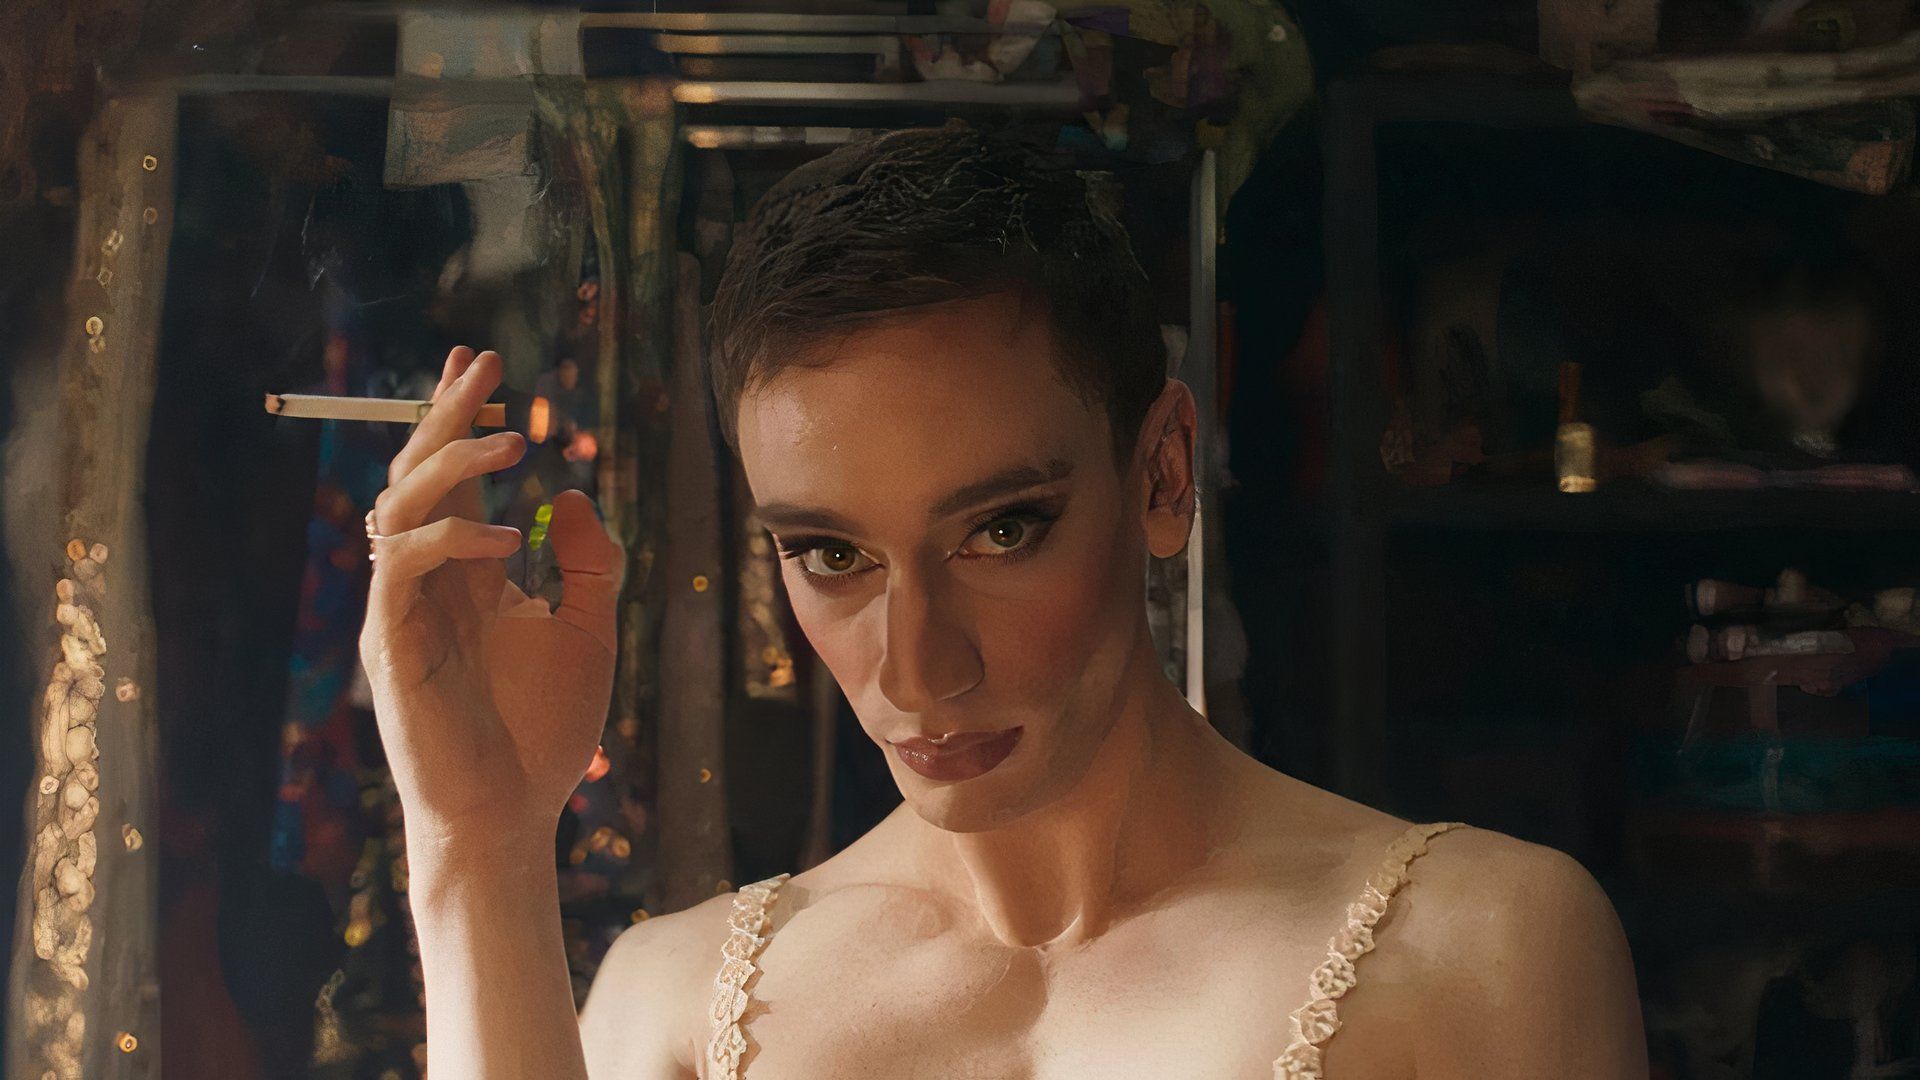 A Heartfelt Coming-of-Age Story Set in the World of Drag